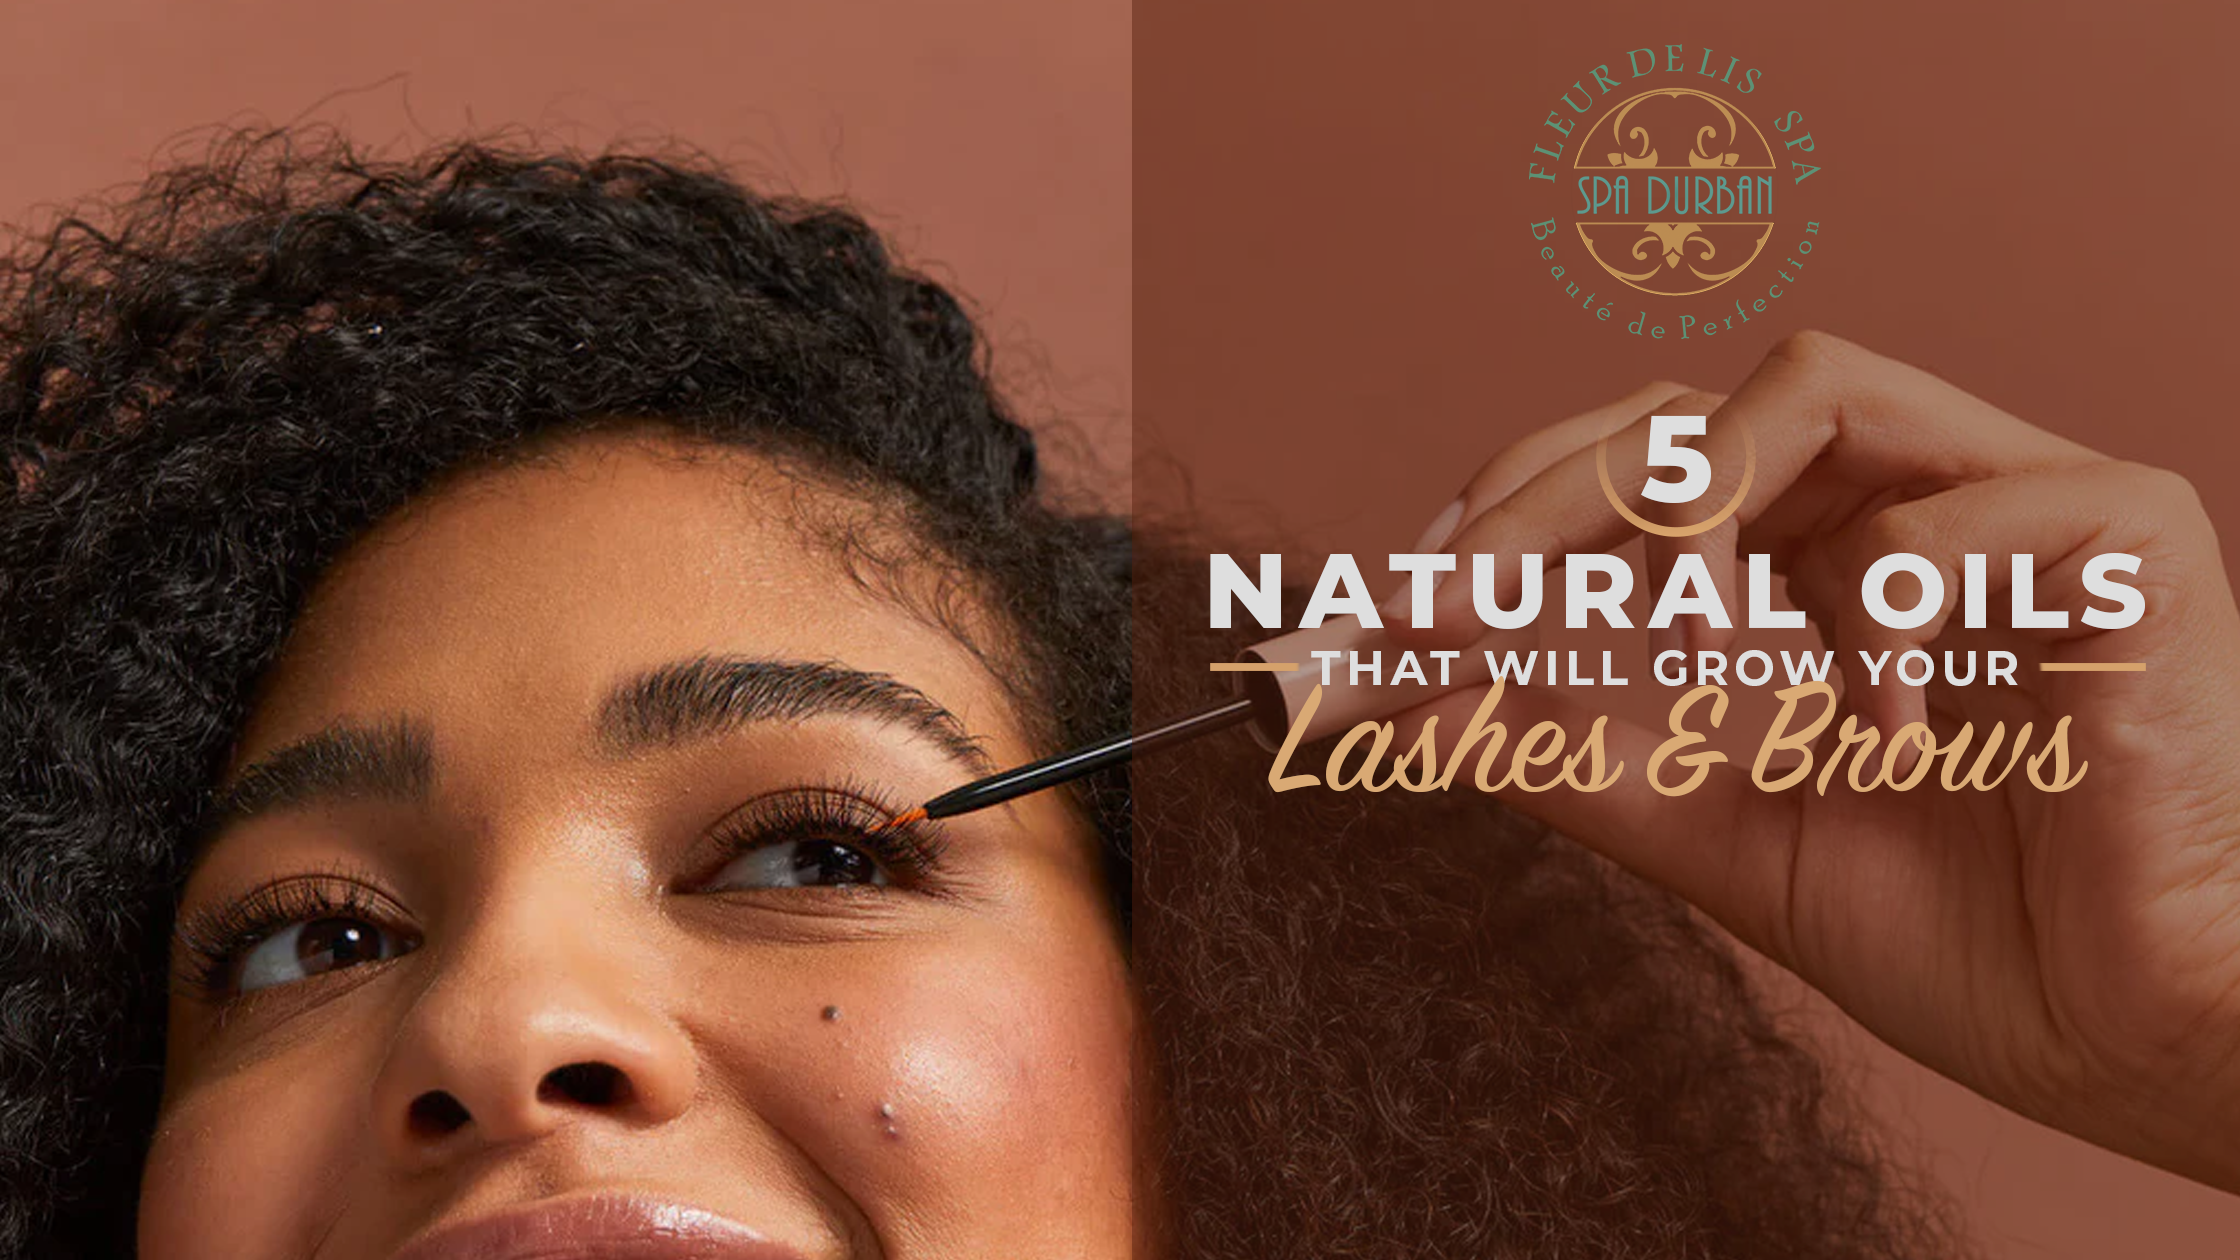 5 Natural Oils that will Grow your Lashes & Brows